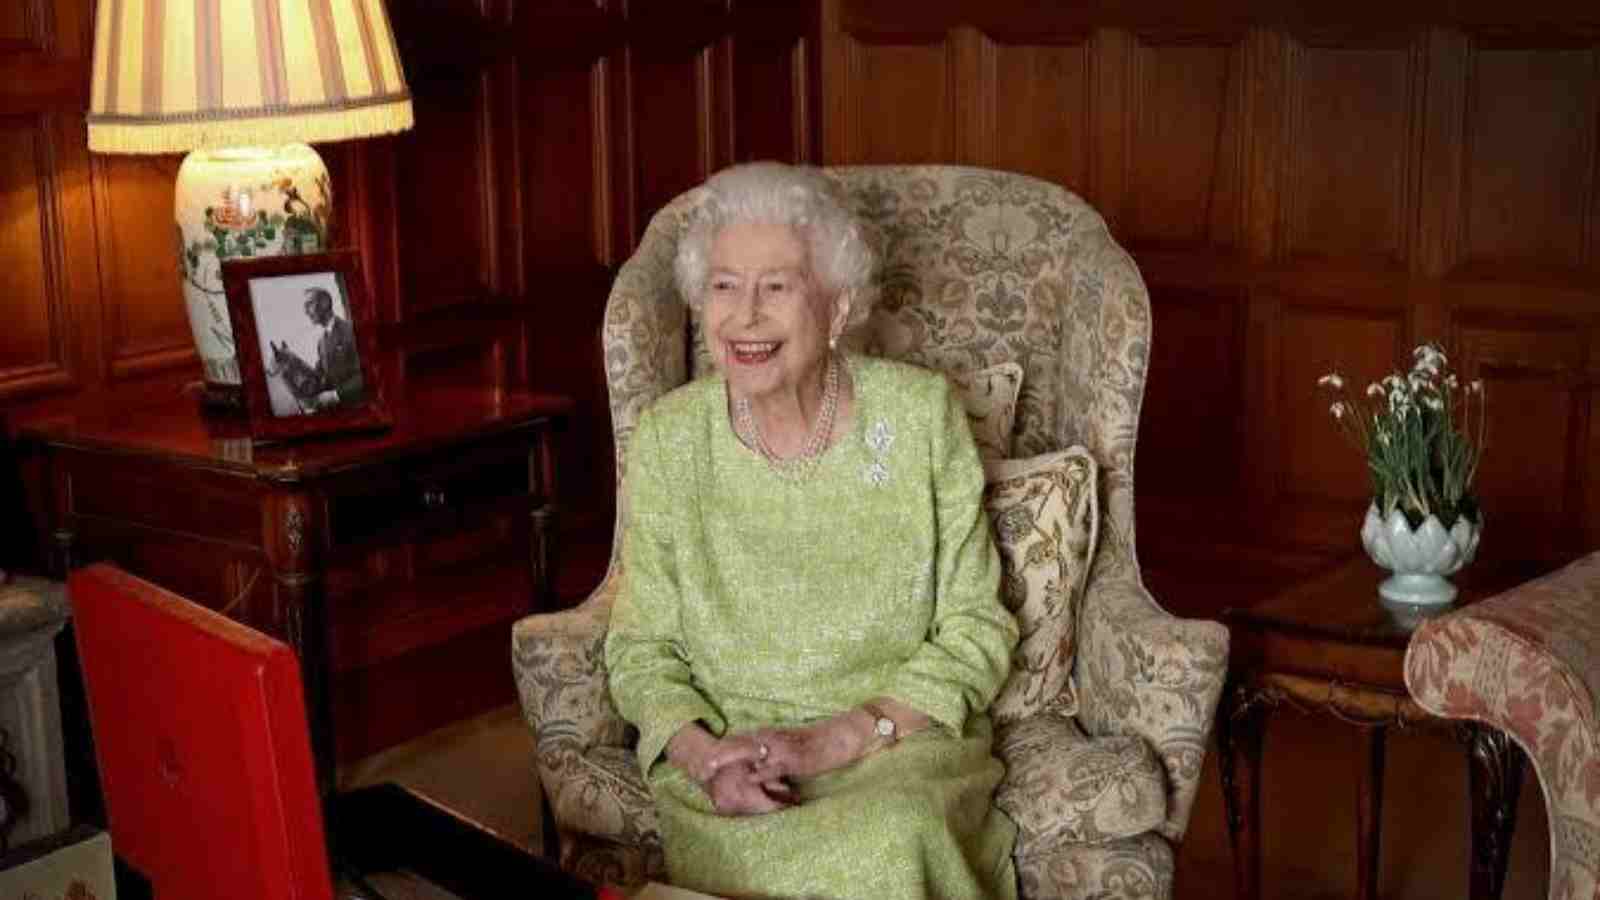 What were the roles of late Queen Elizabeth II? What will change with a King